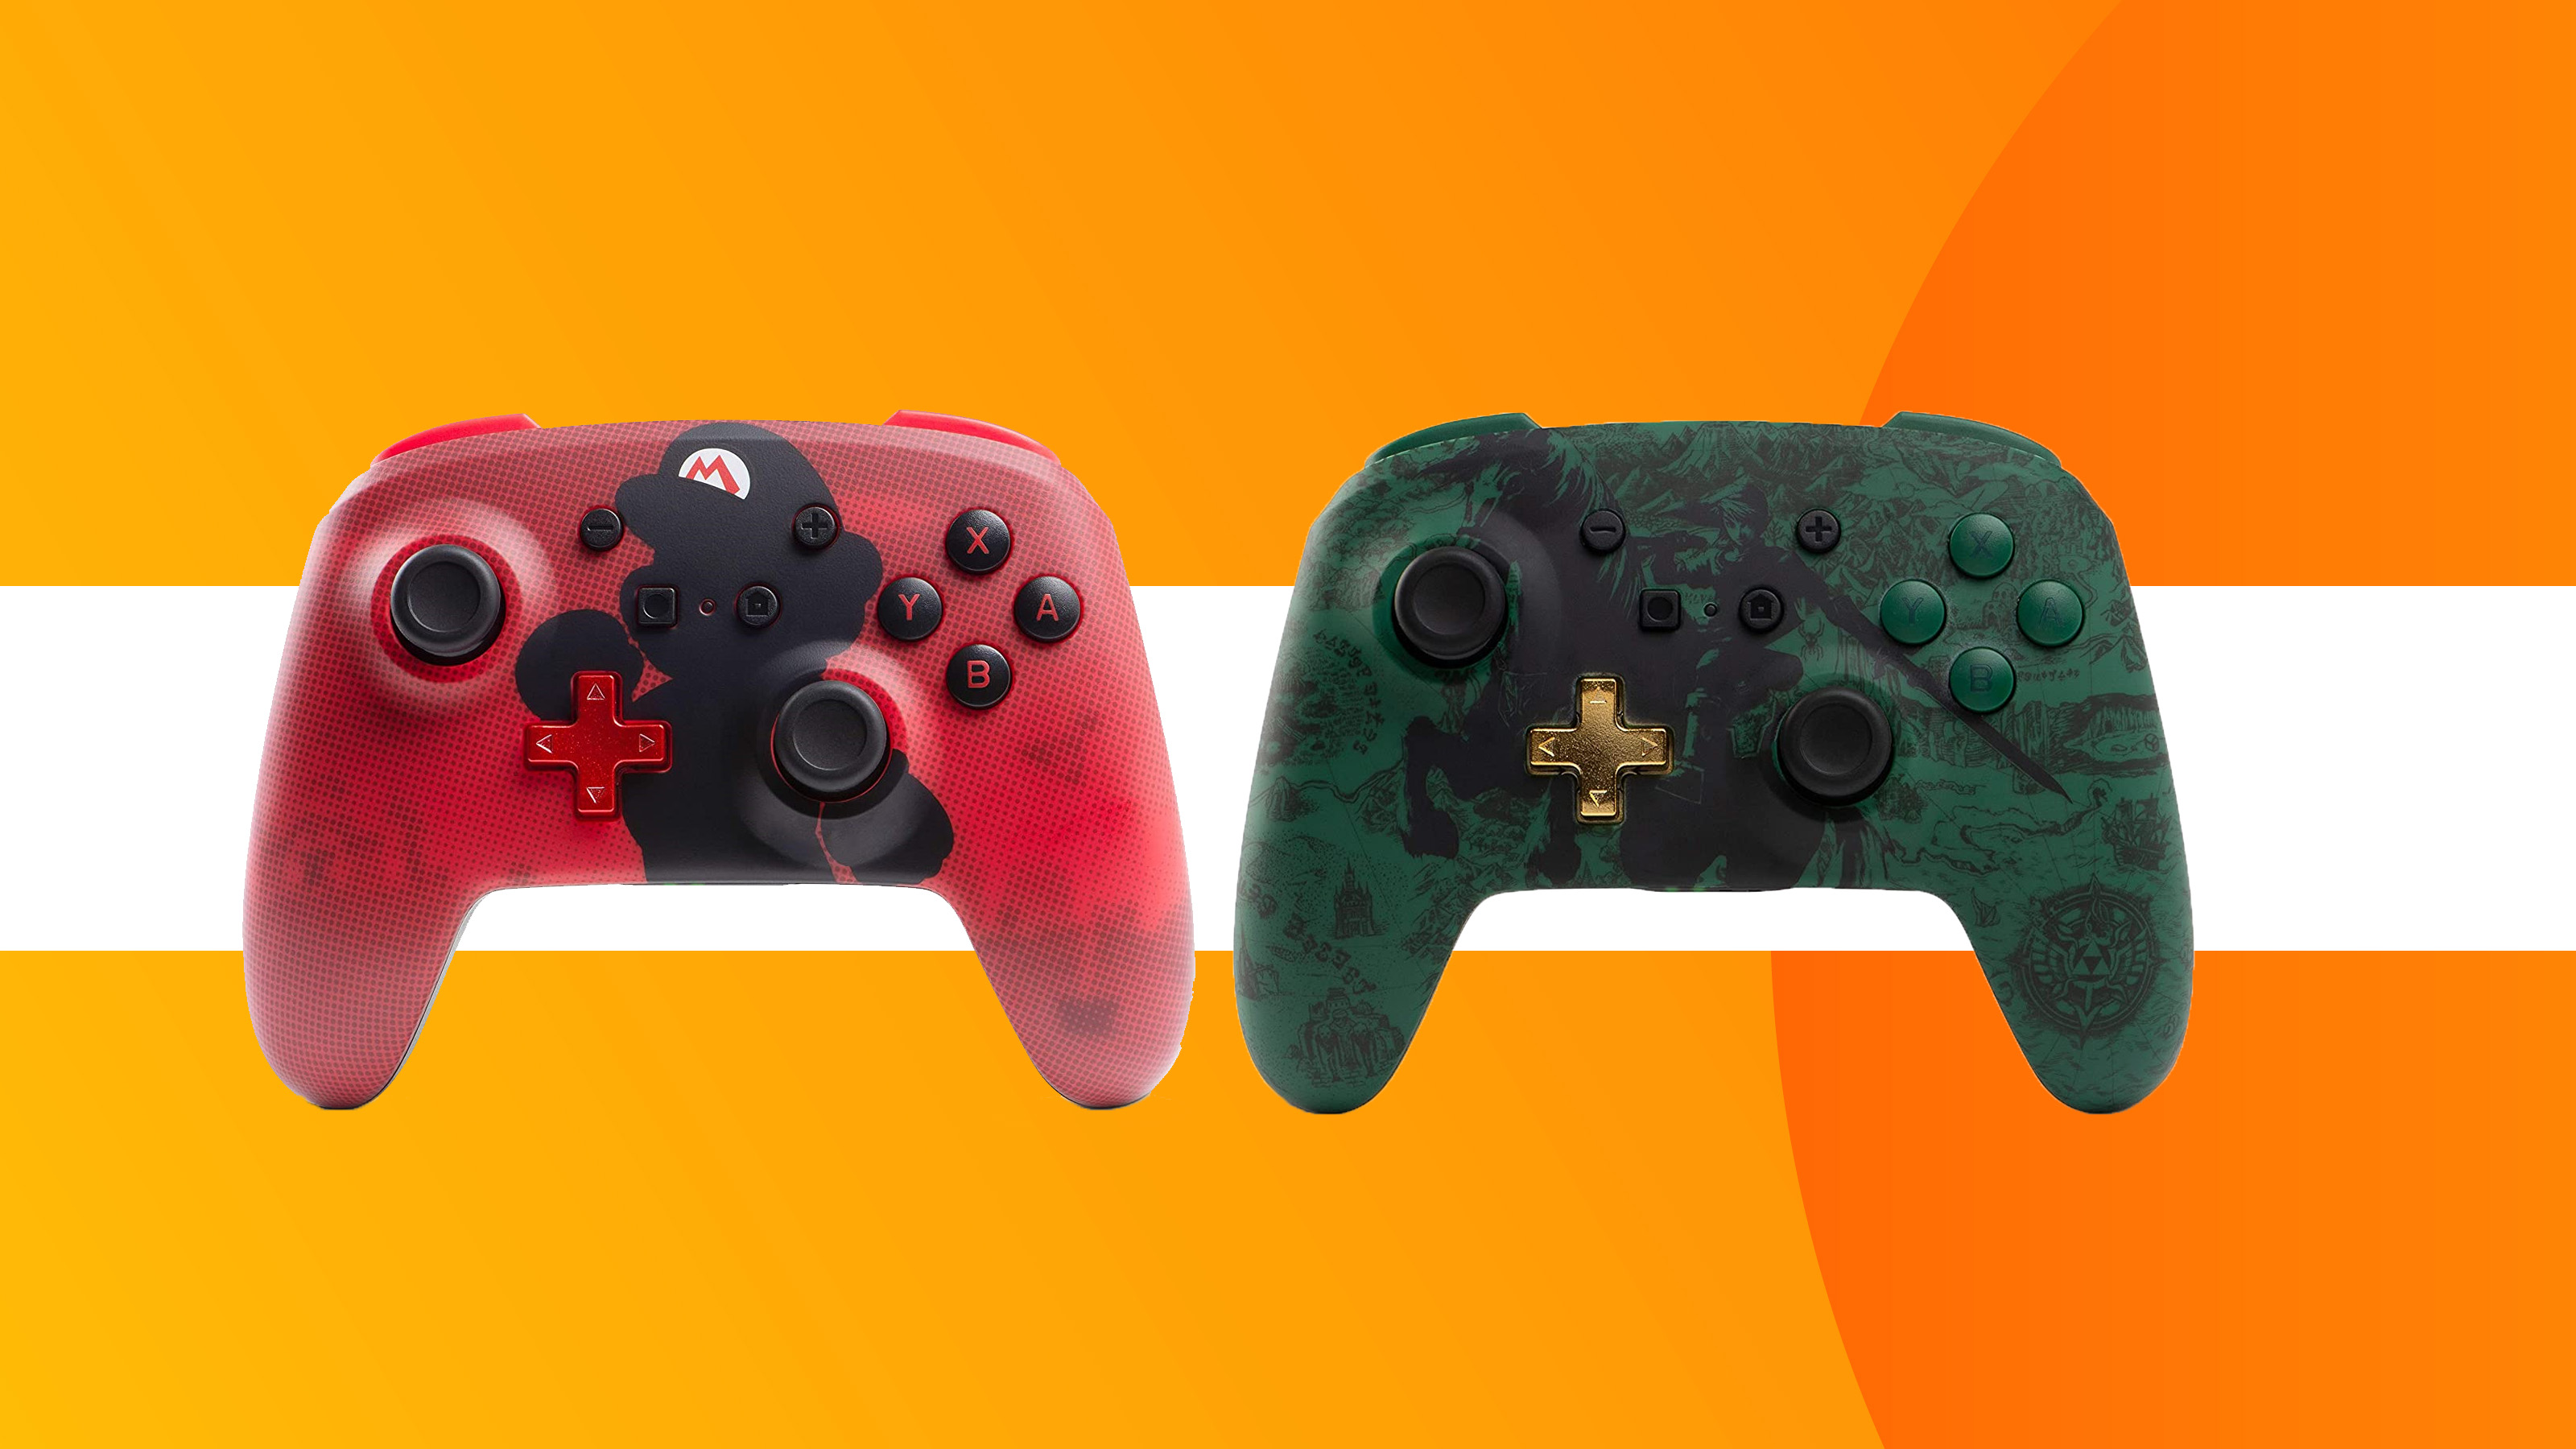 Product shots of the PowerA Switch pads on a colourful background